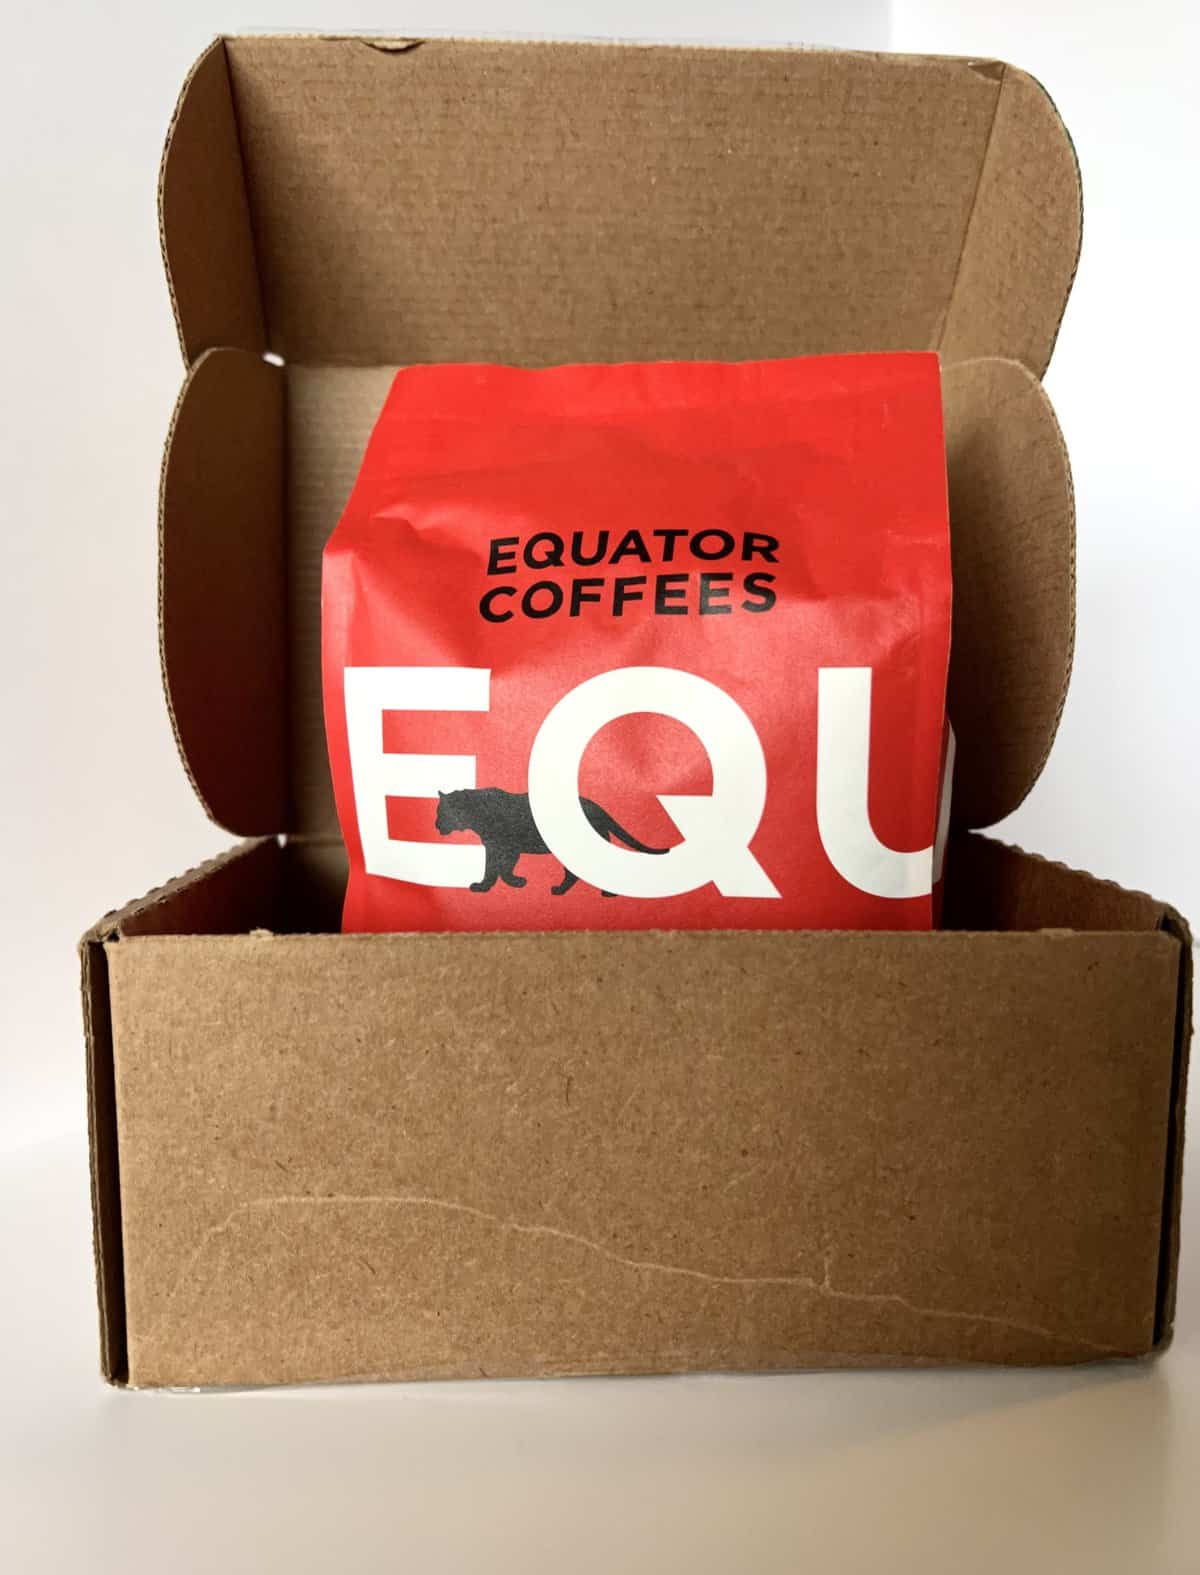 open box with pack of Equator Coffees inside